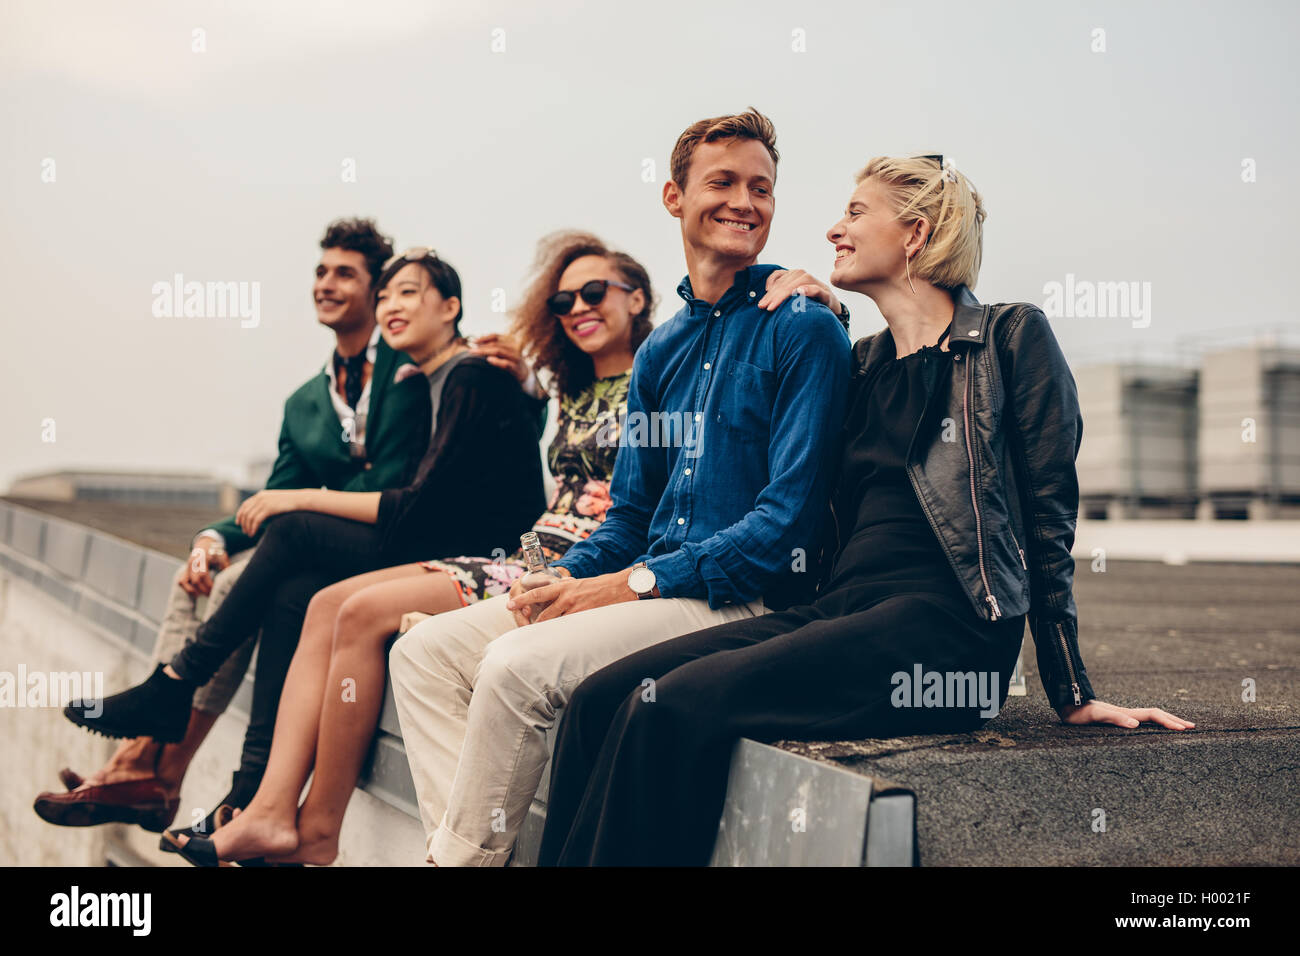 Shot of young men and women sitting together on rooftop. Mixed race friends relaxing on terrace. Stock Photo